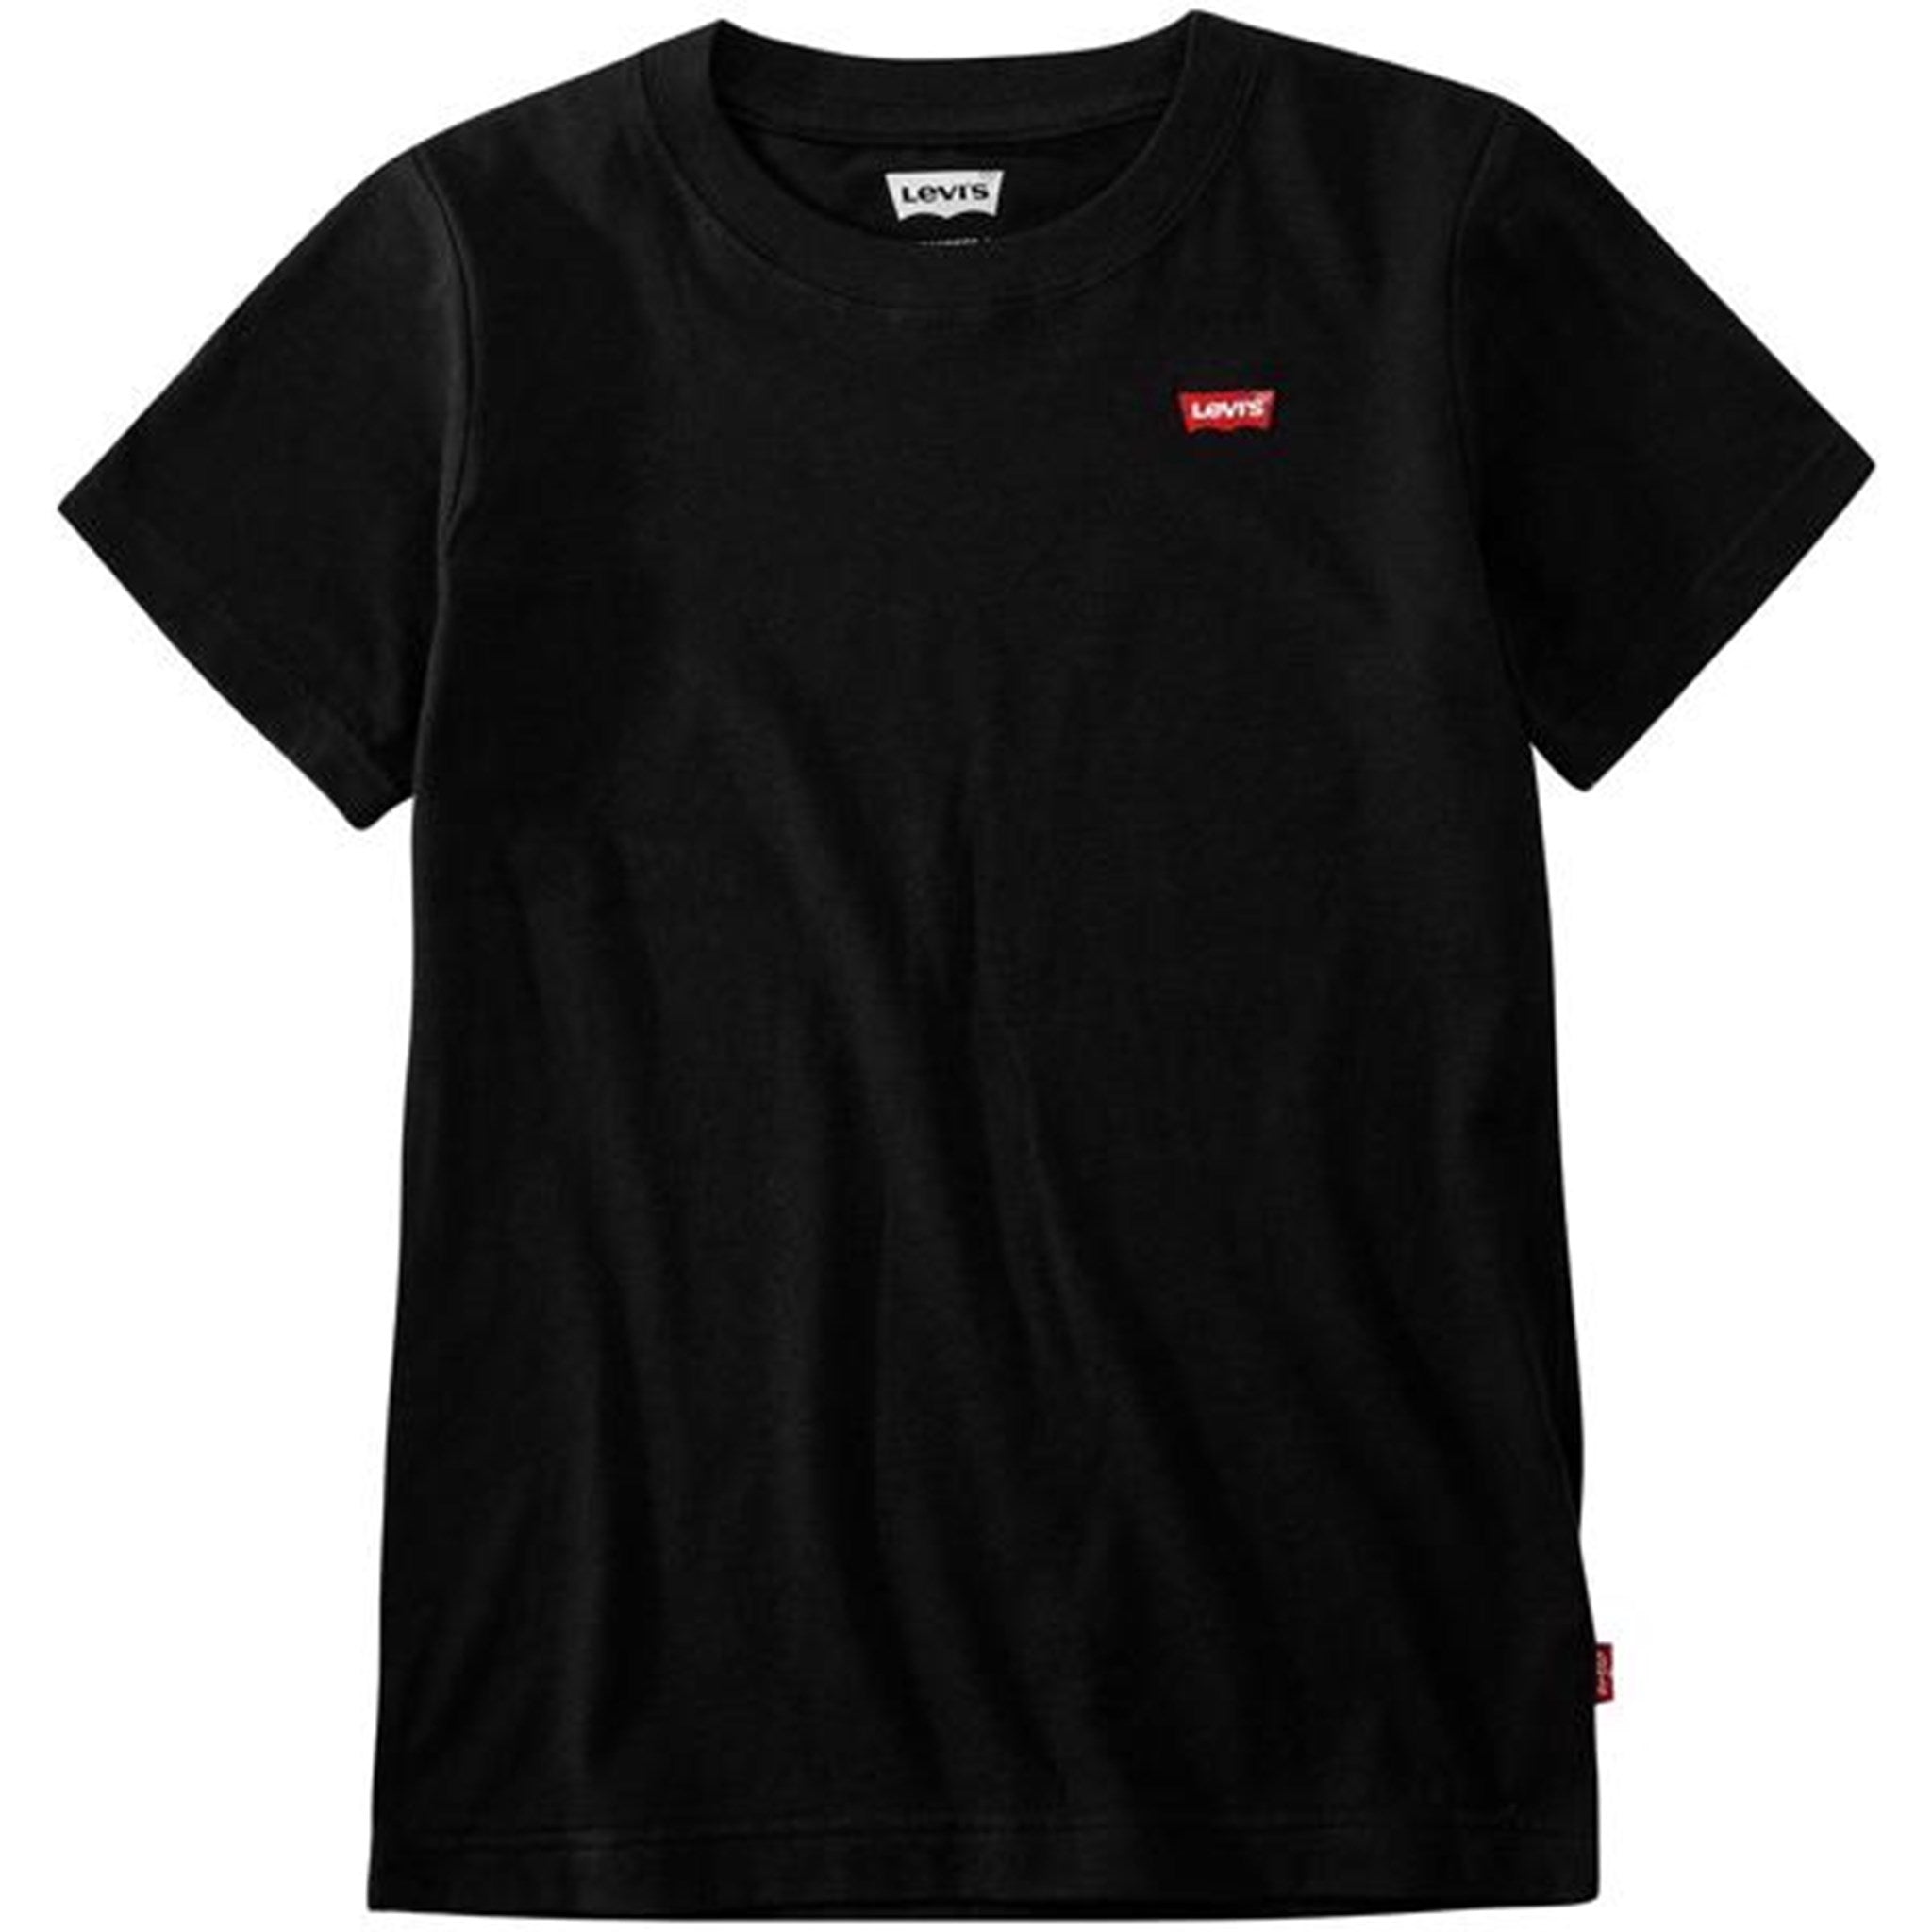 Levis Tee SS Batwing Chest Hit Black